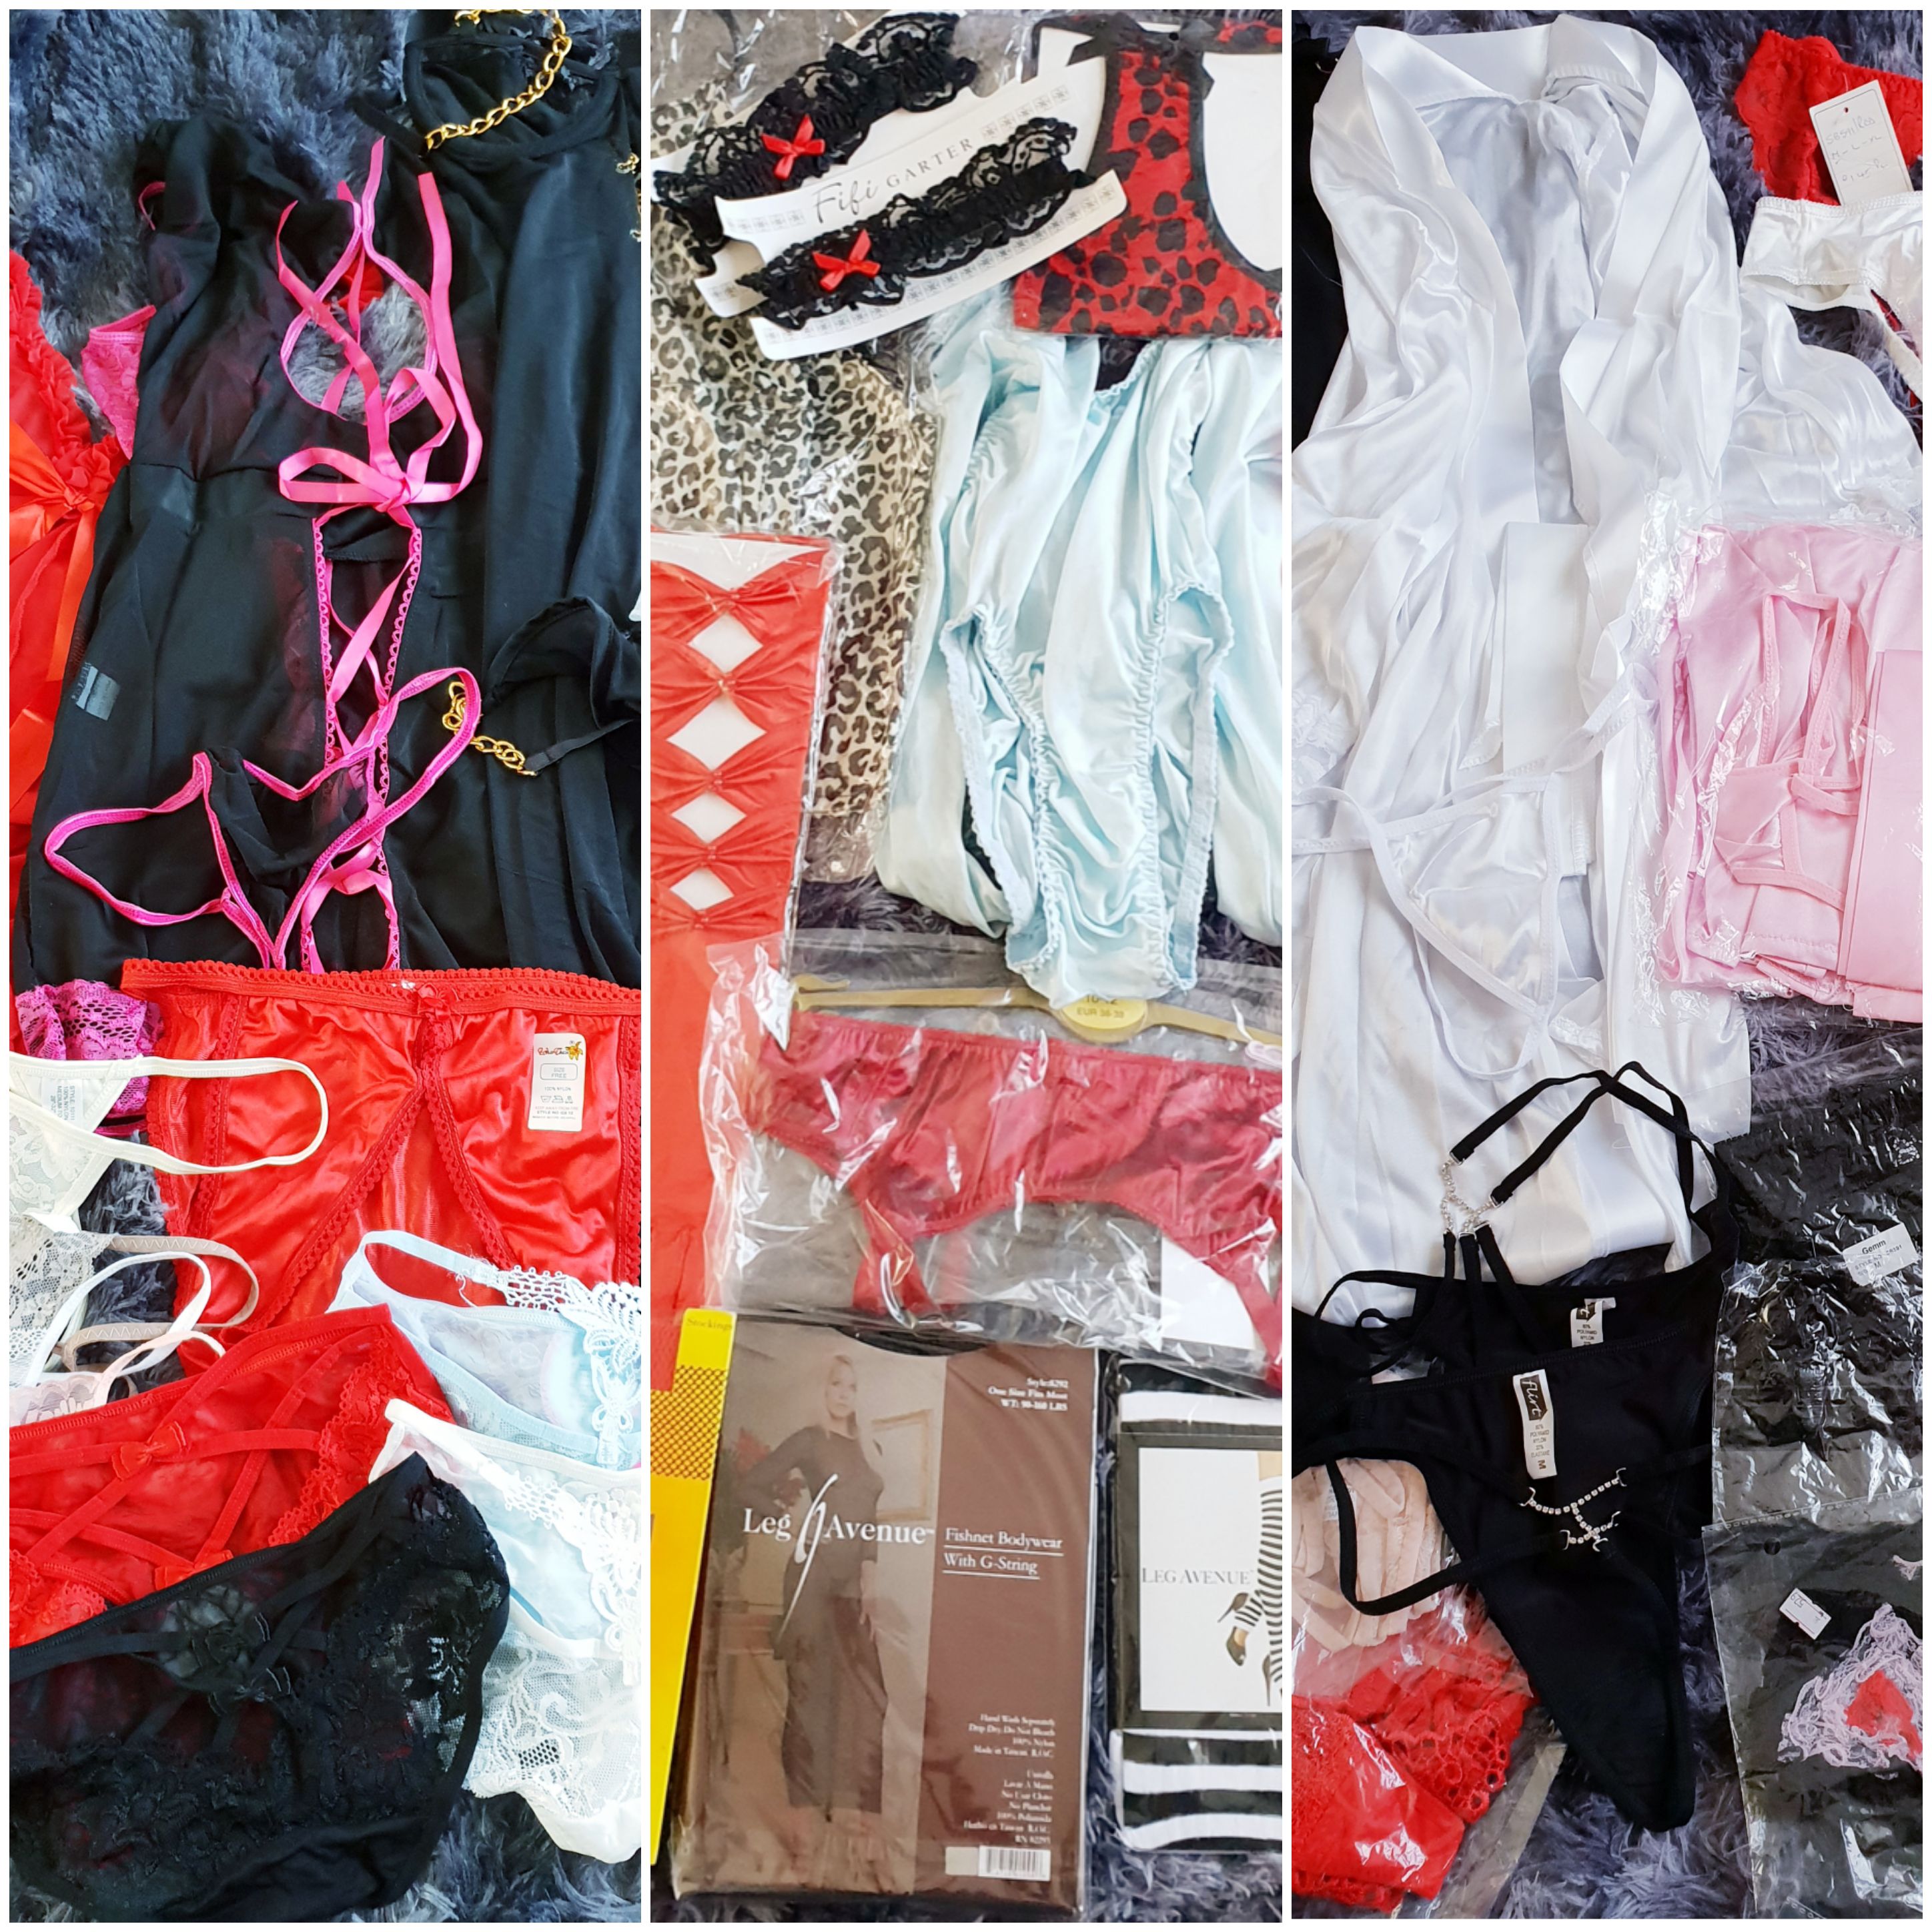 Exotic lingerie (1) Lot of 40 Outfits / Sets, briefs / thongs, hosiery & accessories